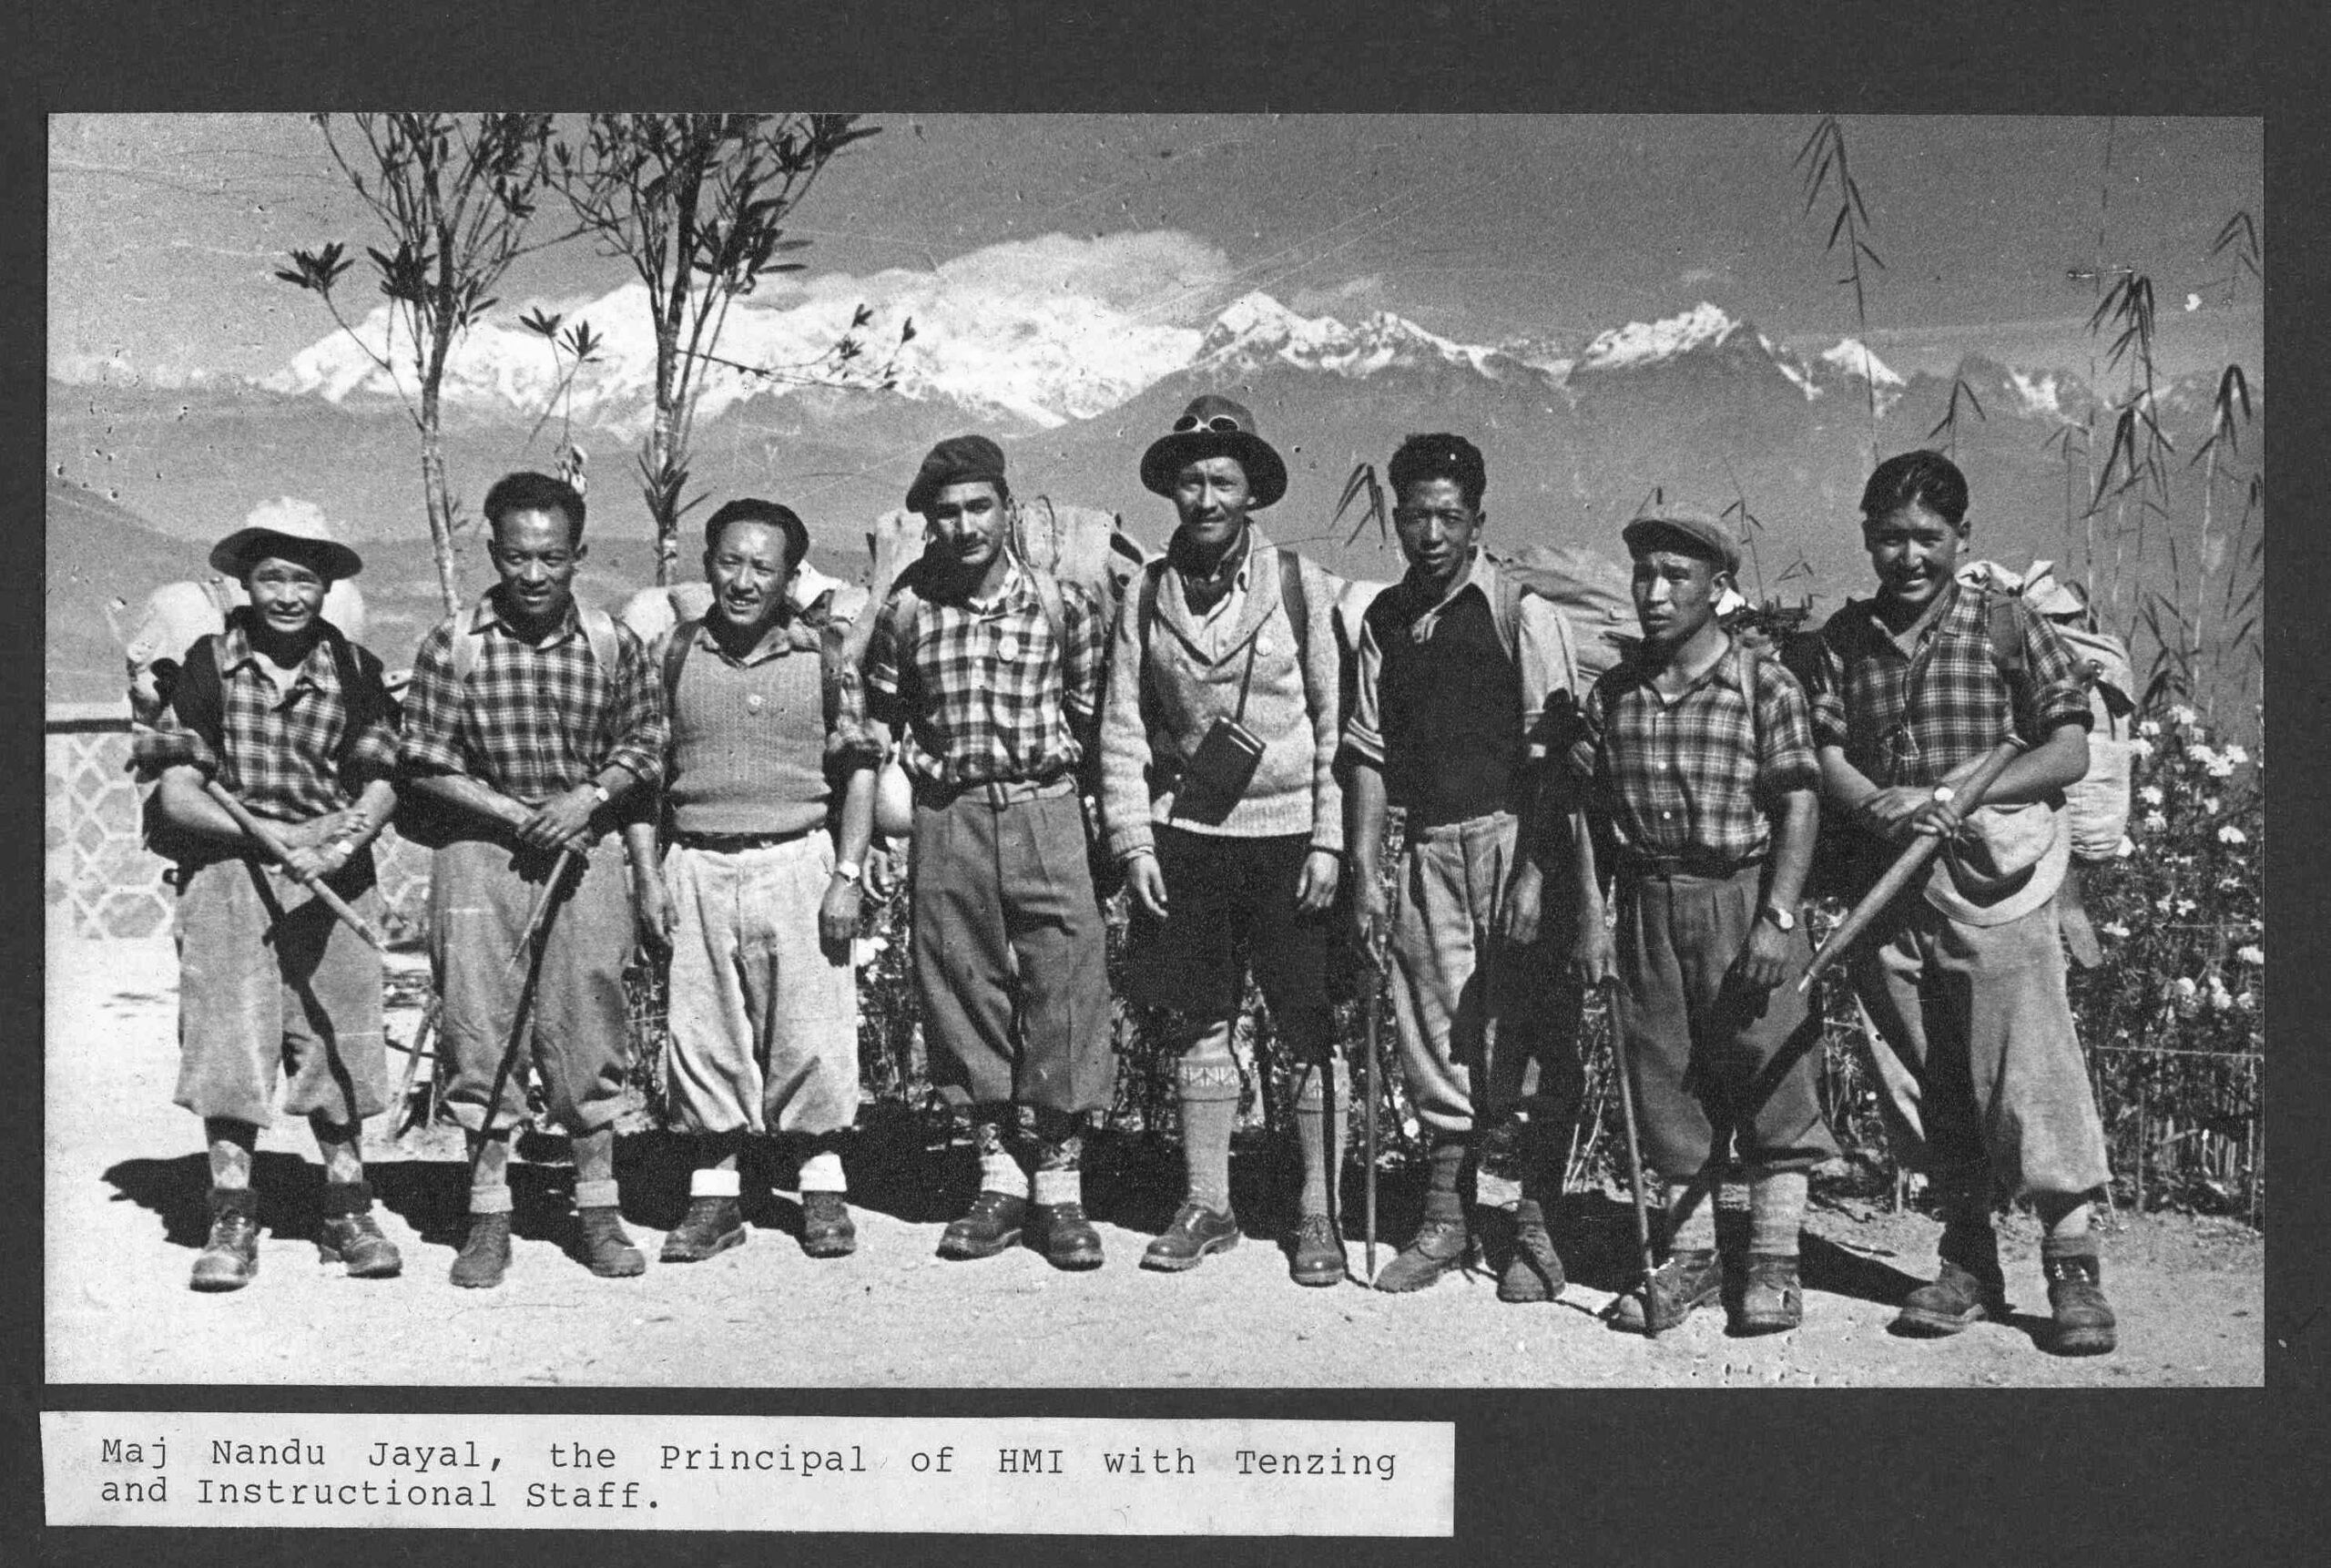 A number of high-altitude climbers in training in the 1950s.